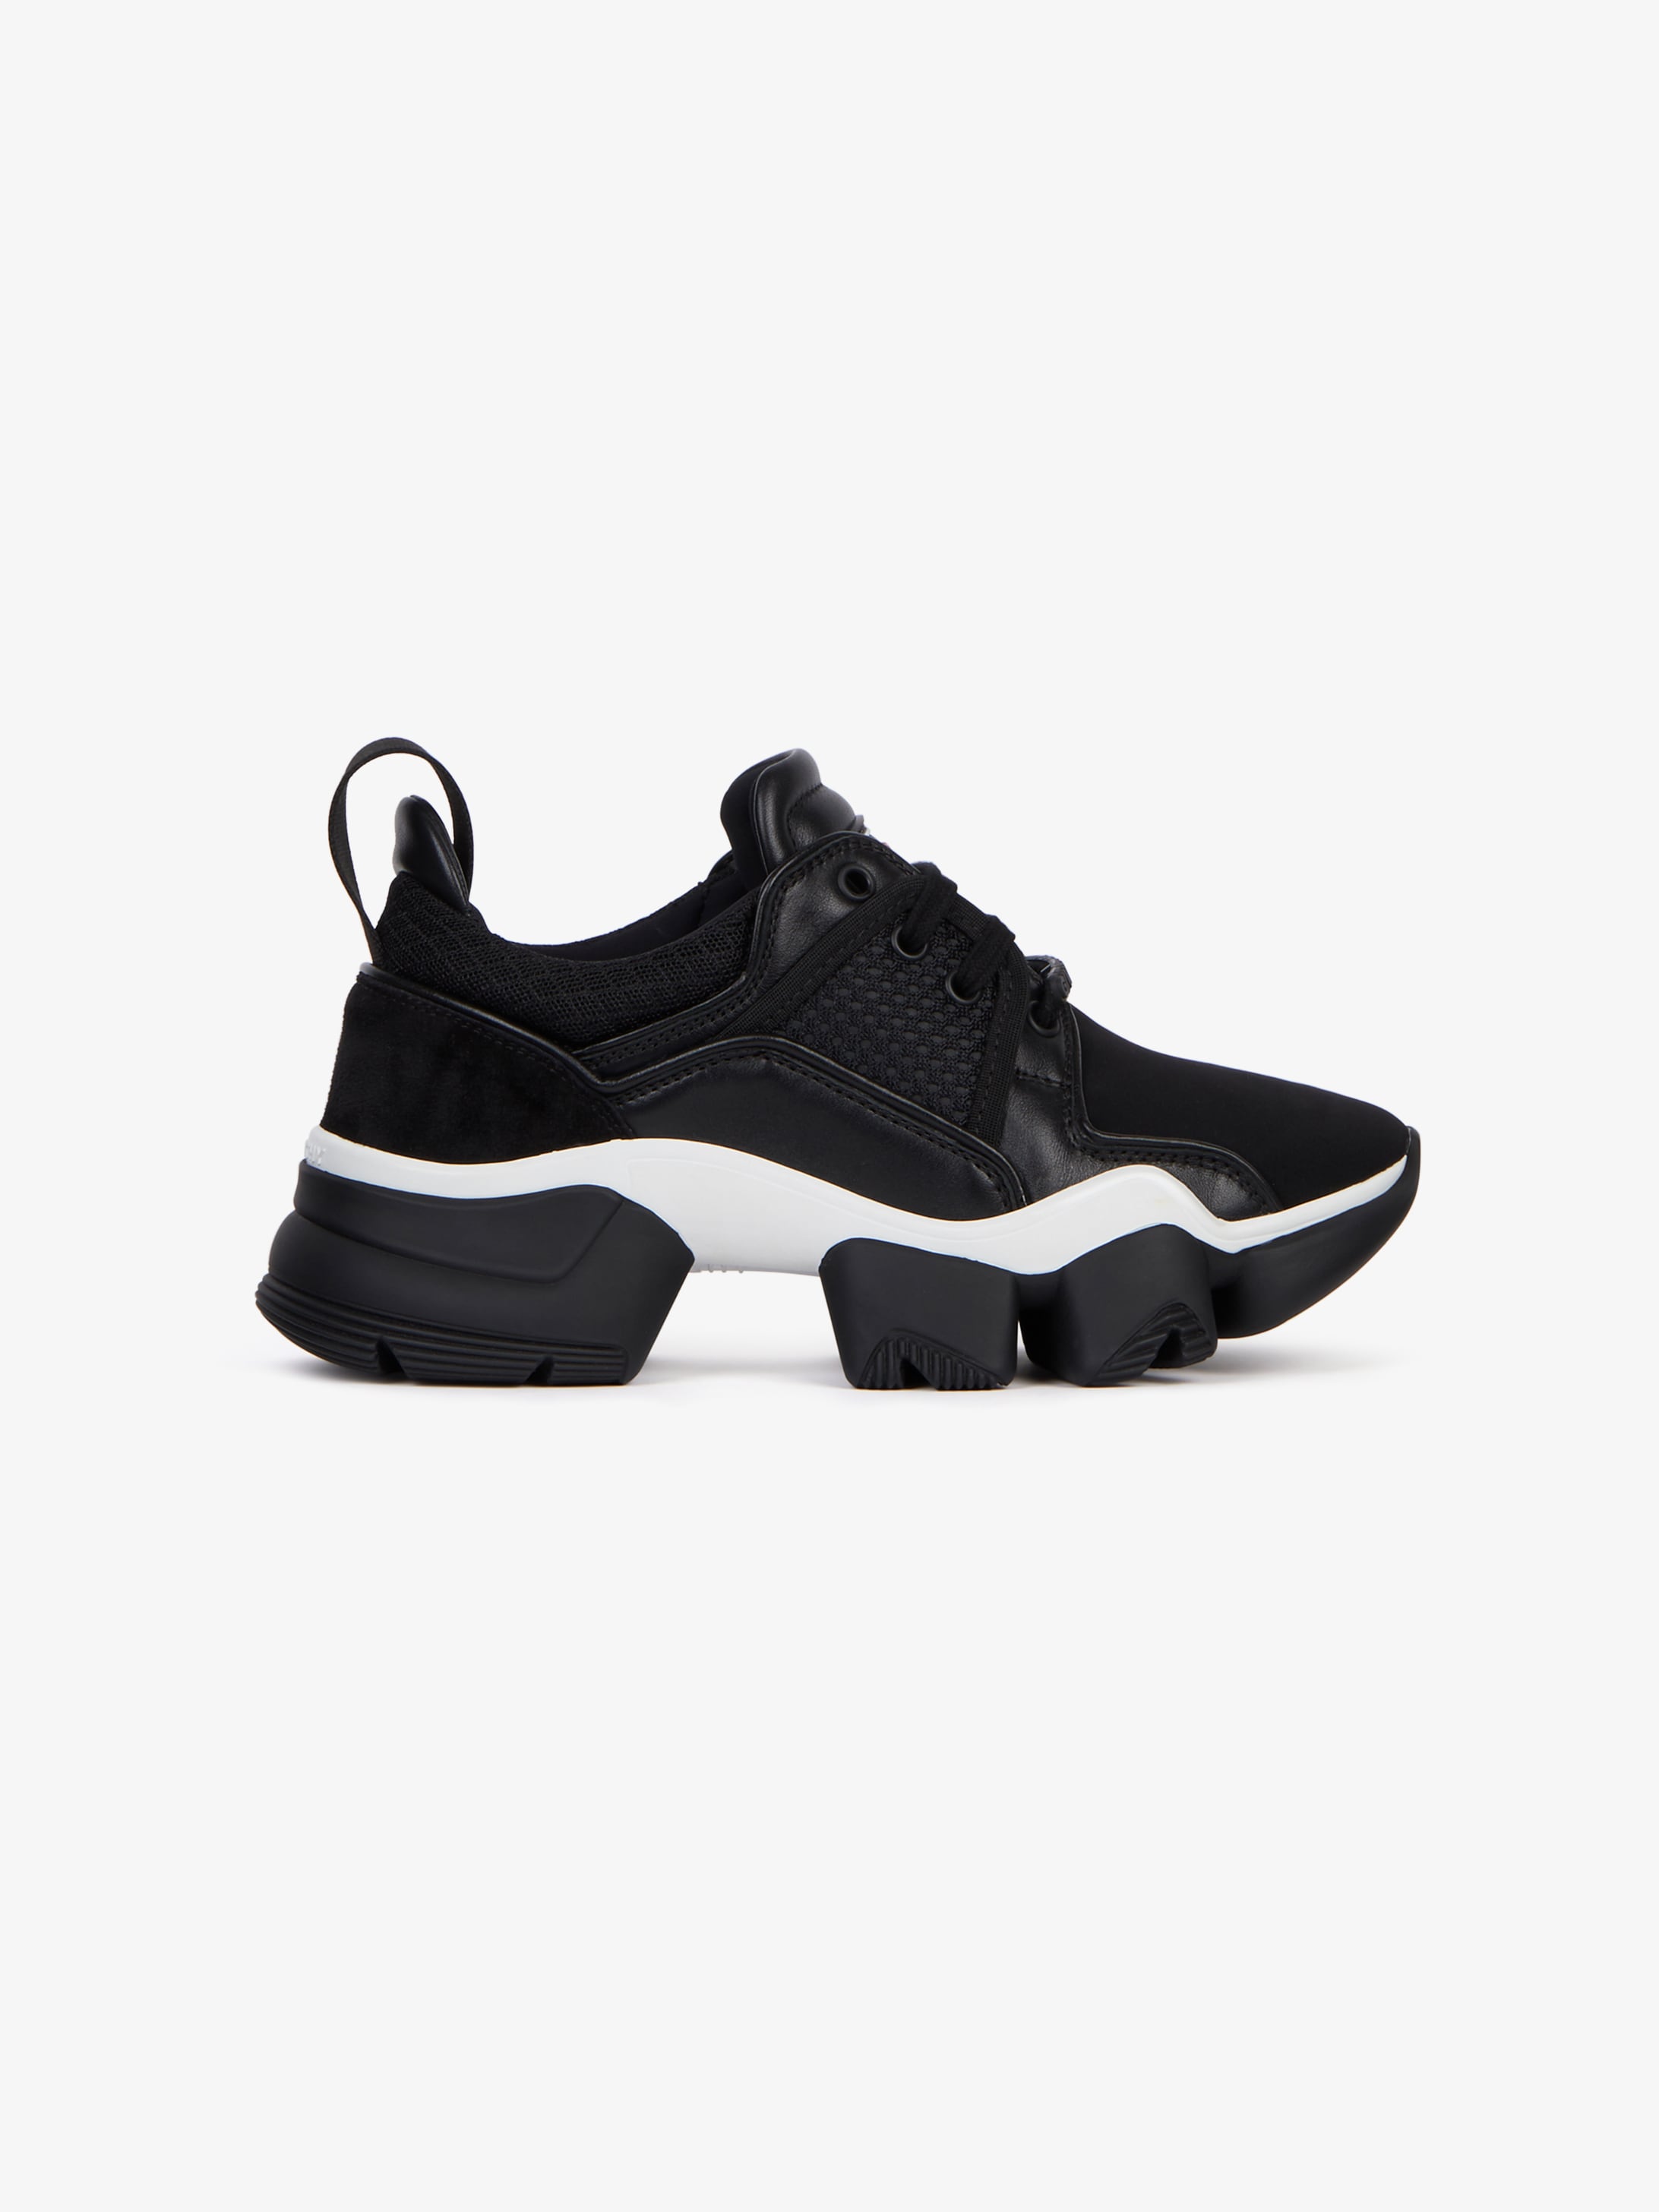 JAW low sneakers in neoprene and 